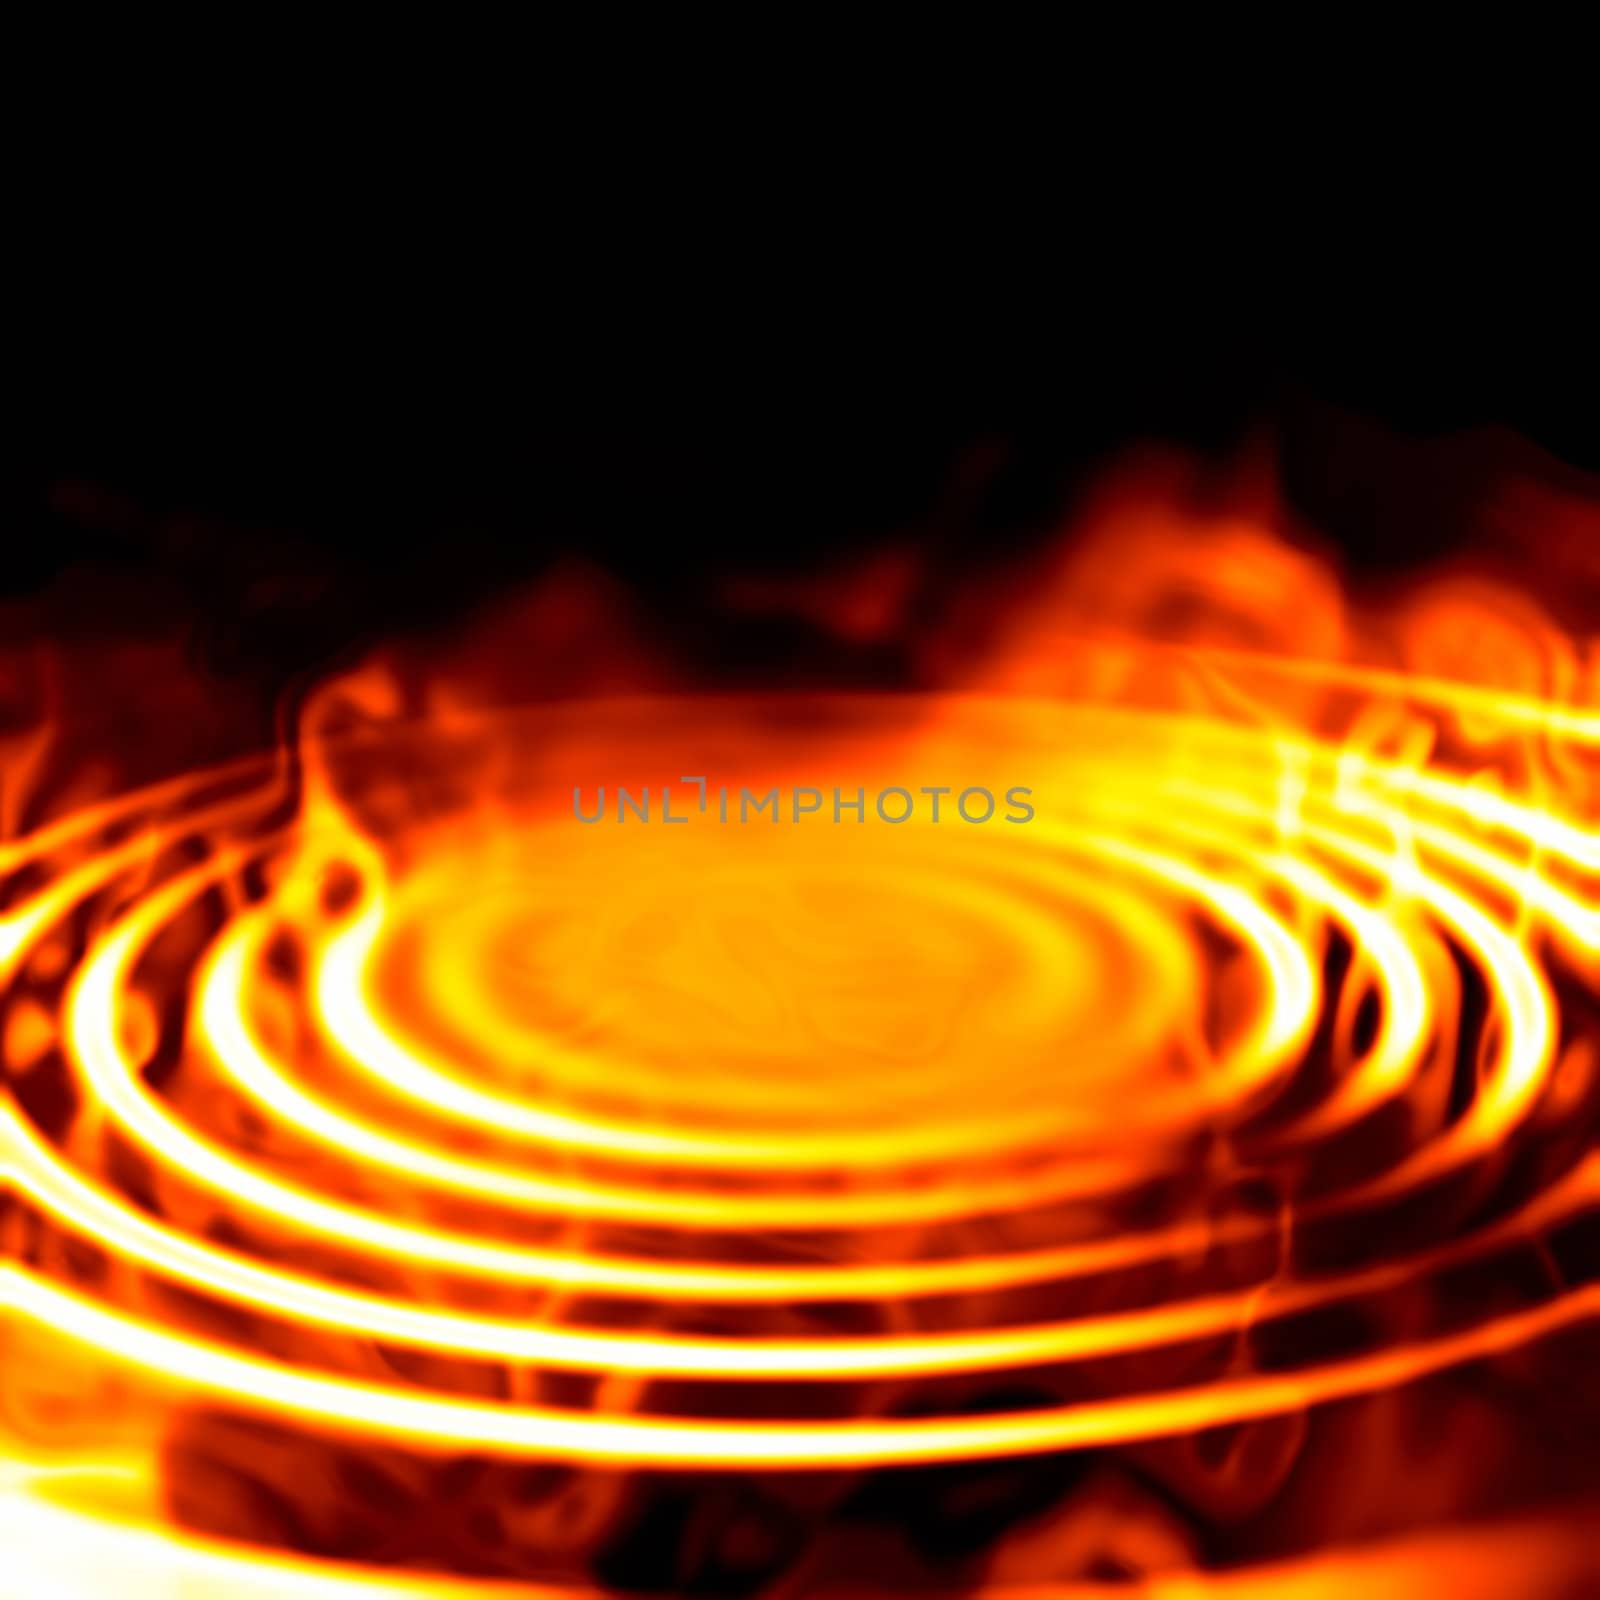 An illustration of a nice abstract fire graphic background